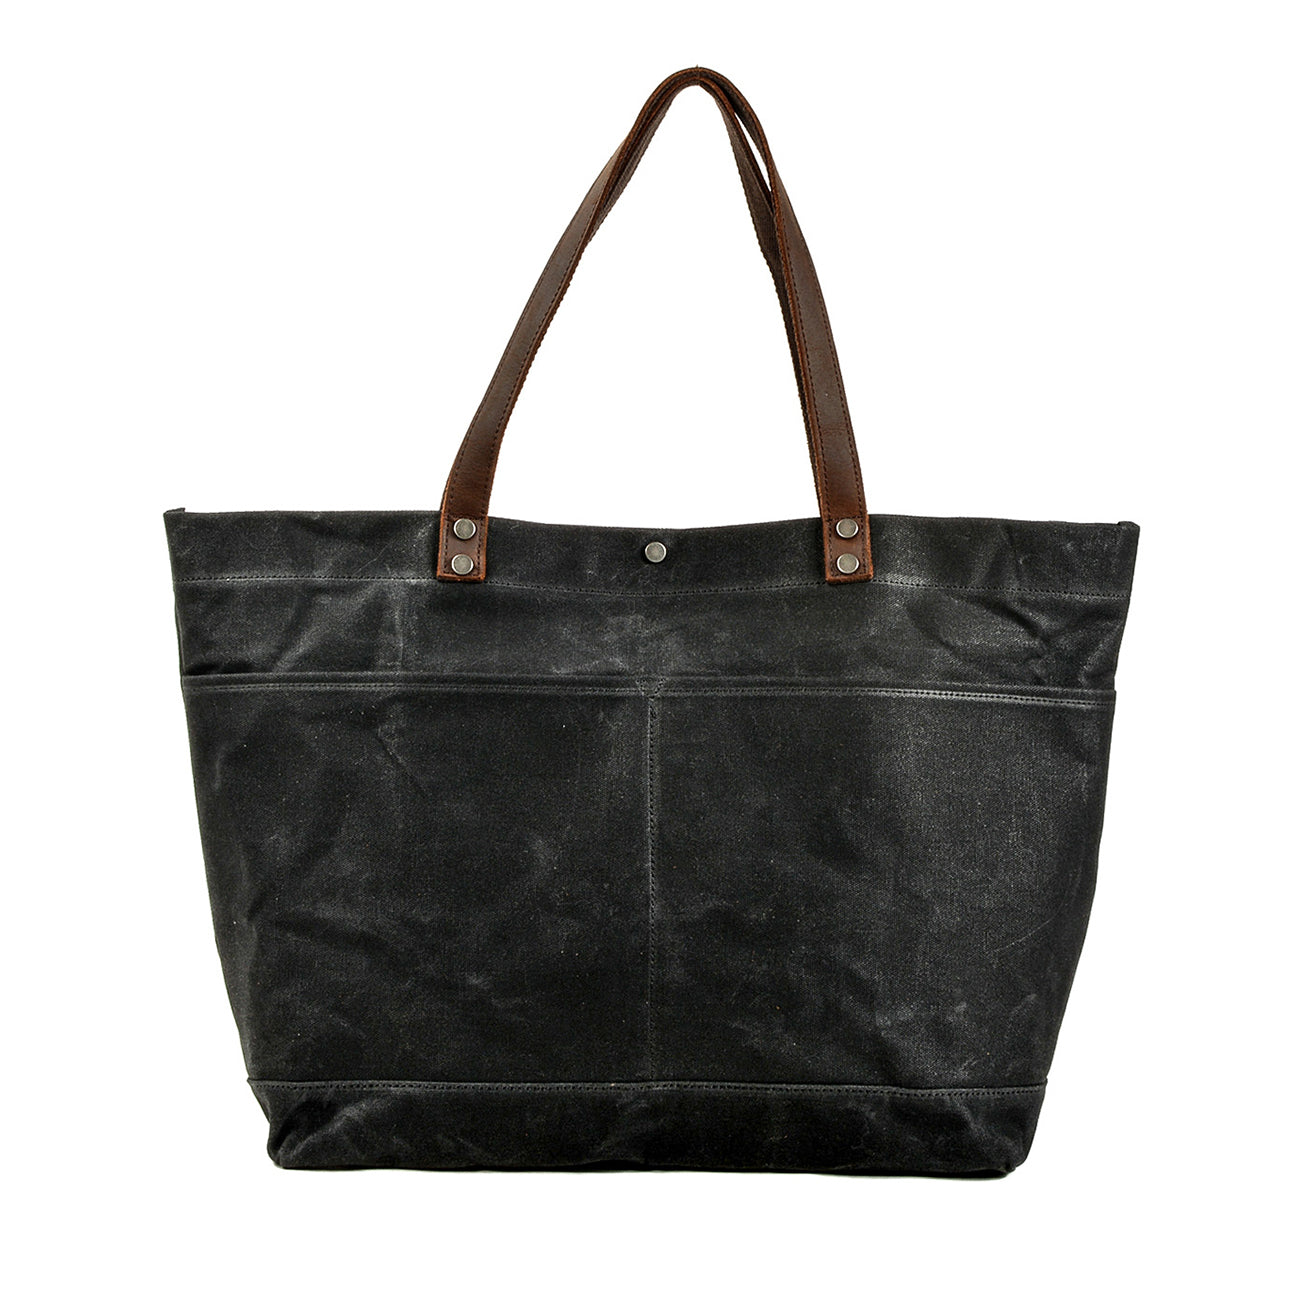 Waxed canvas roll top tote bag with luggage handle attachment leather  handles and shoul